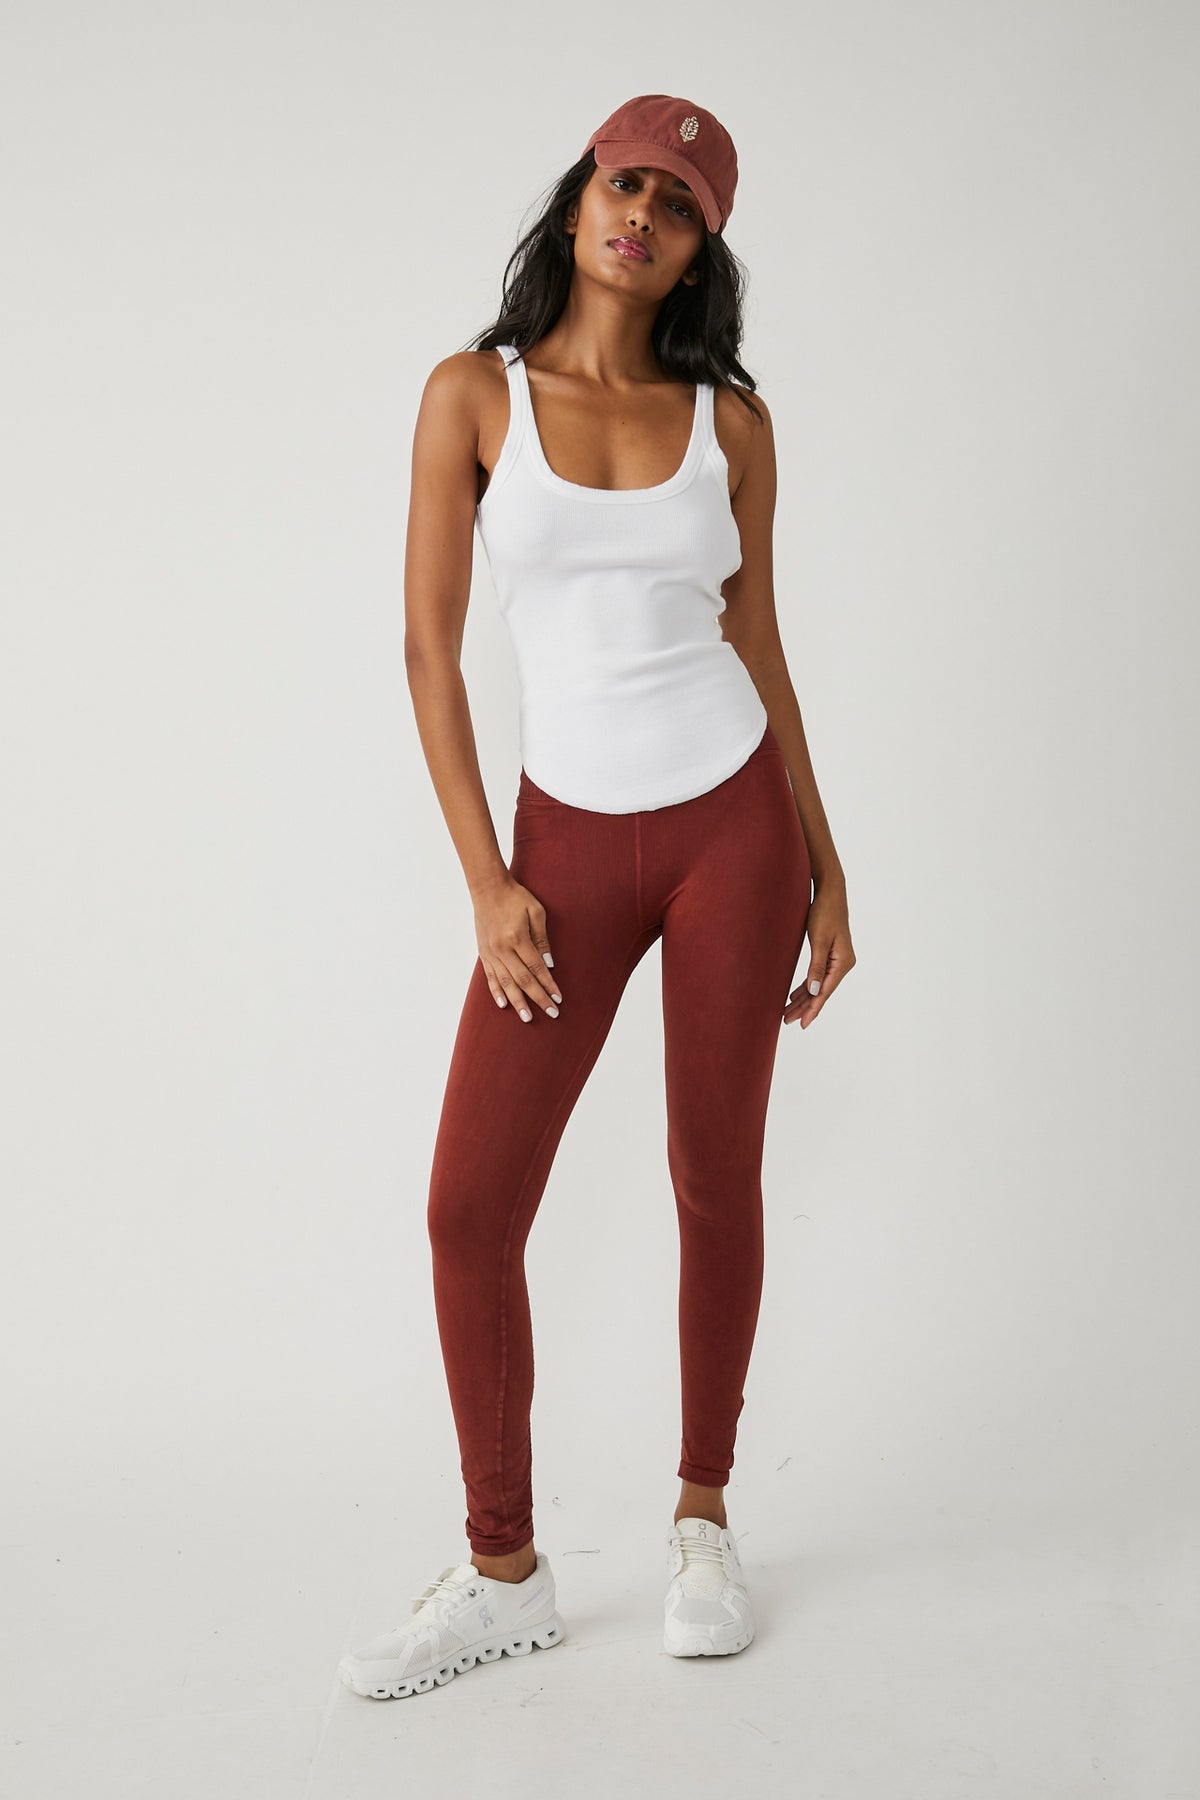 Free People Movement High Rise 7/8 Length Good Karma Leggings Size Medium/ Large Brown - $49 - From Adrienne